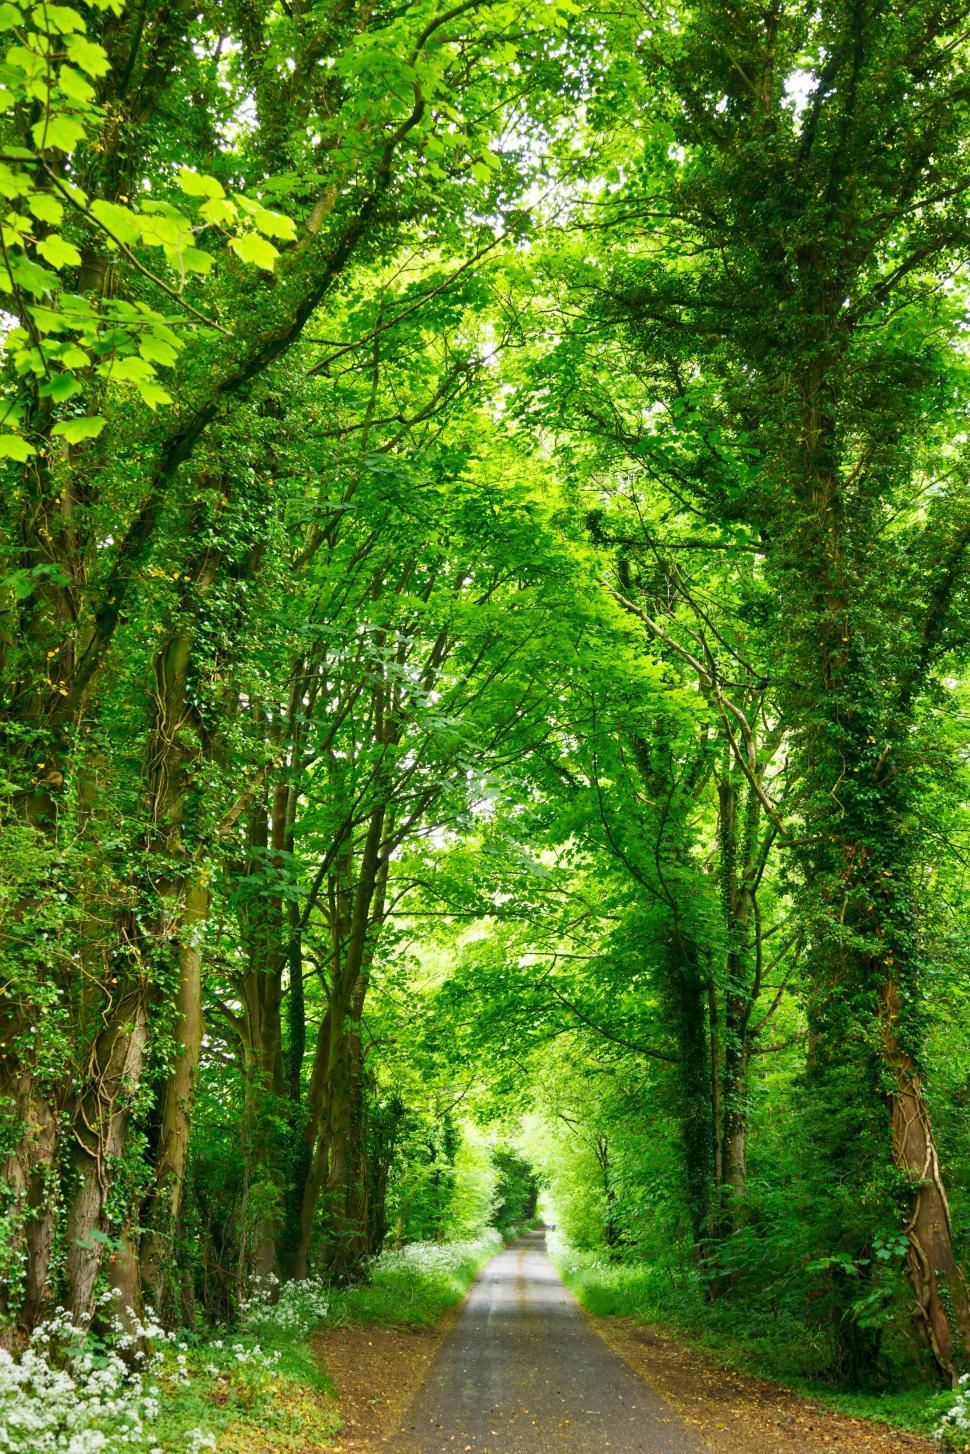 Free Image of Dirt Road Surrounded by Trees and Greenery 